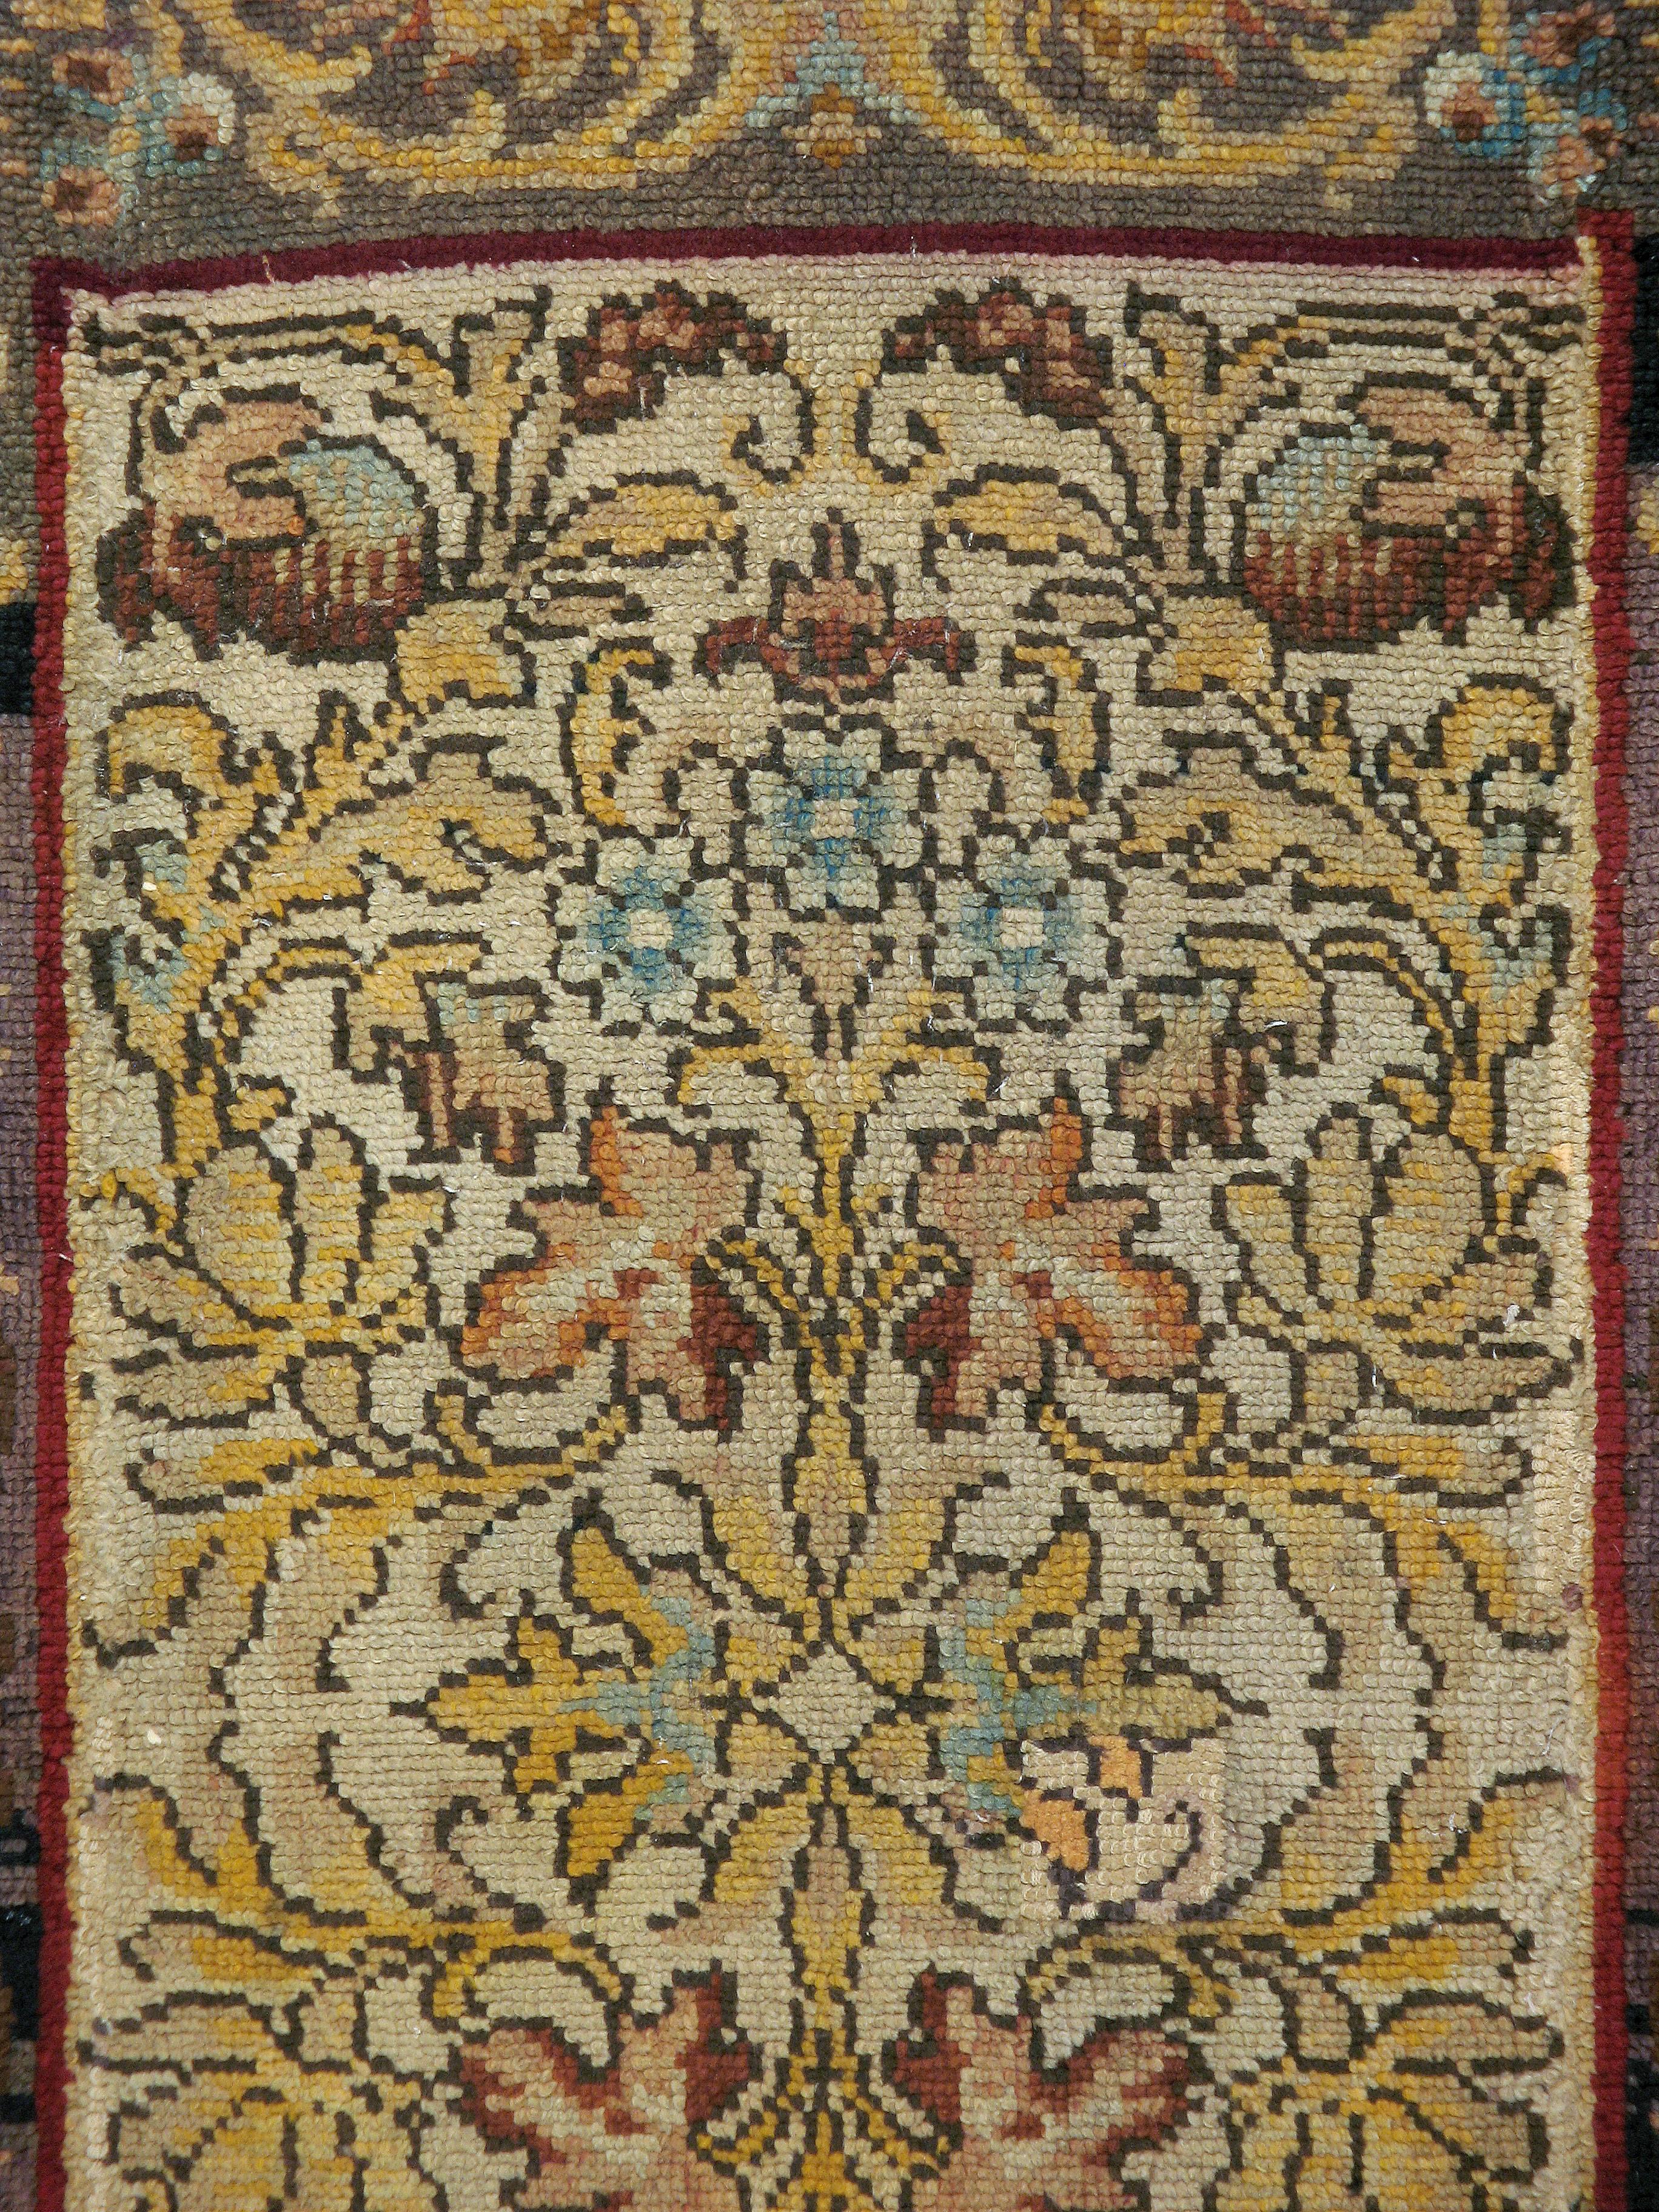 A vintage Irish Donegal carpet from the mid-20th century.